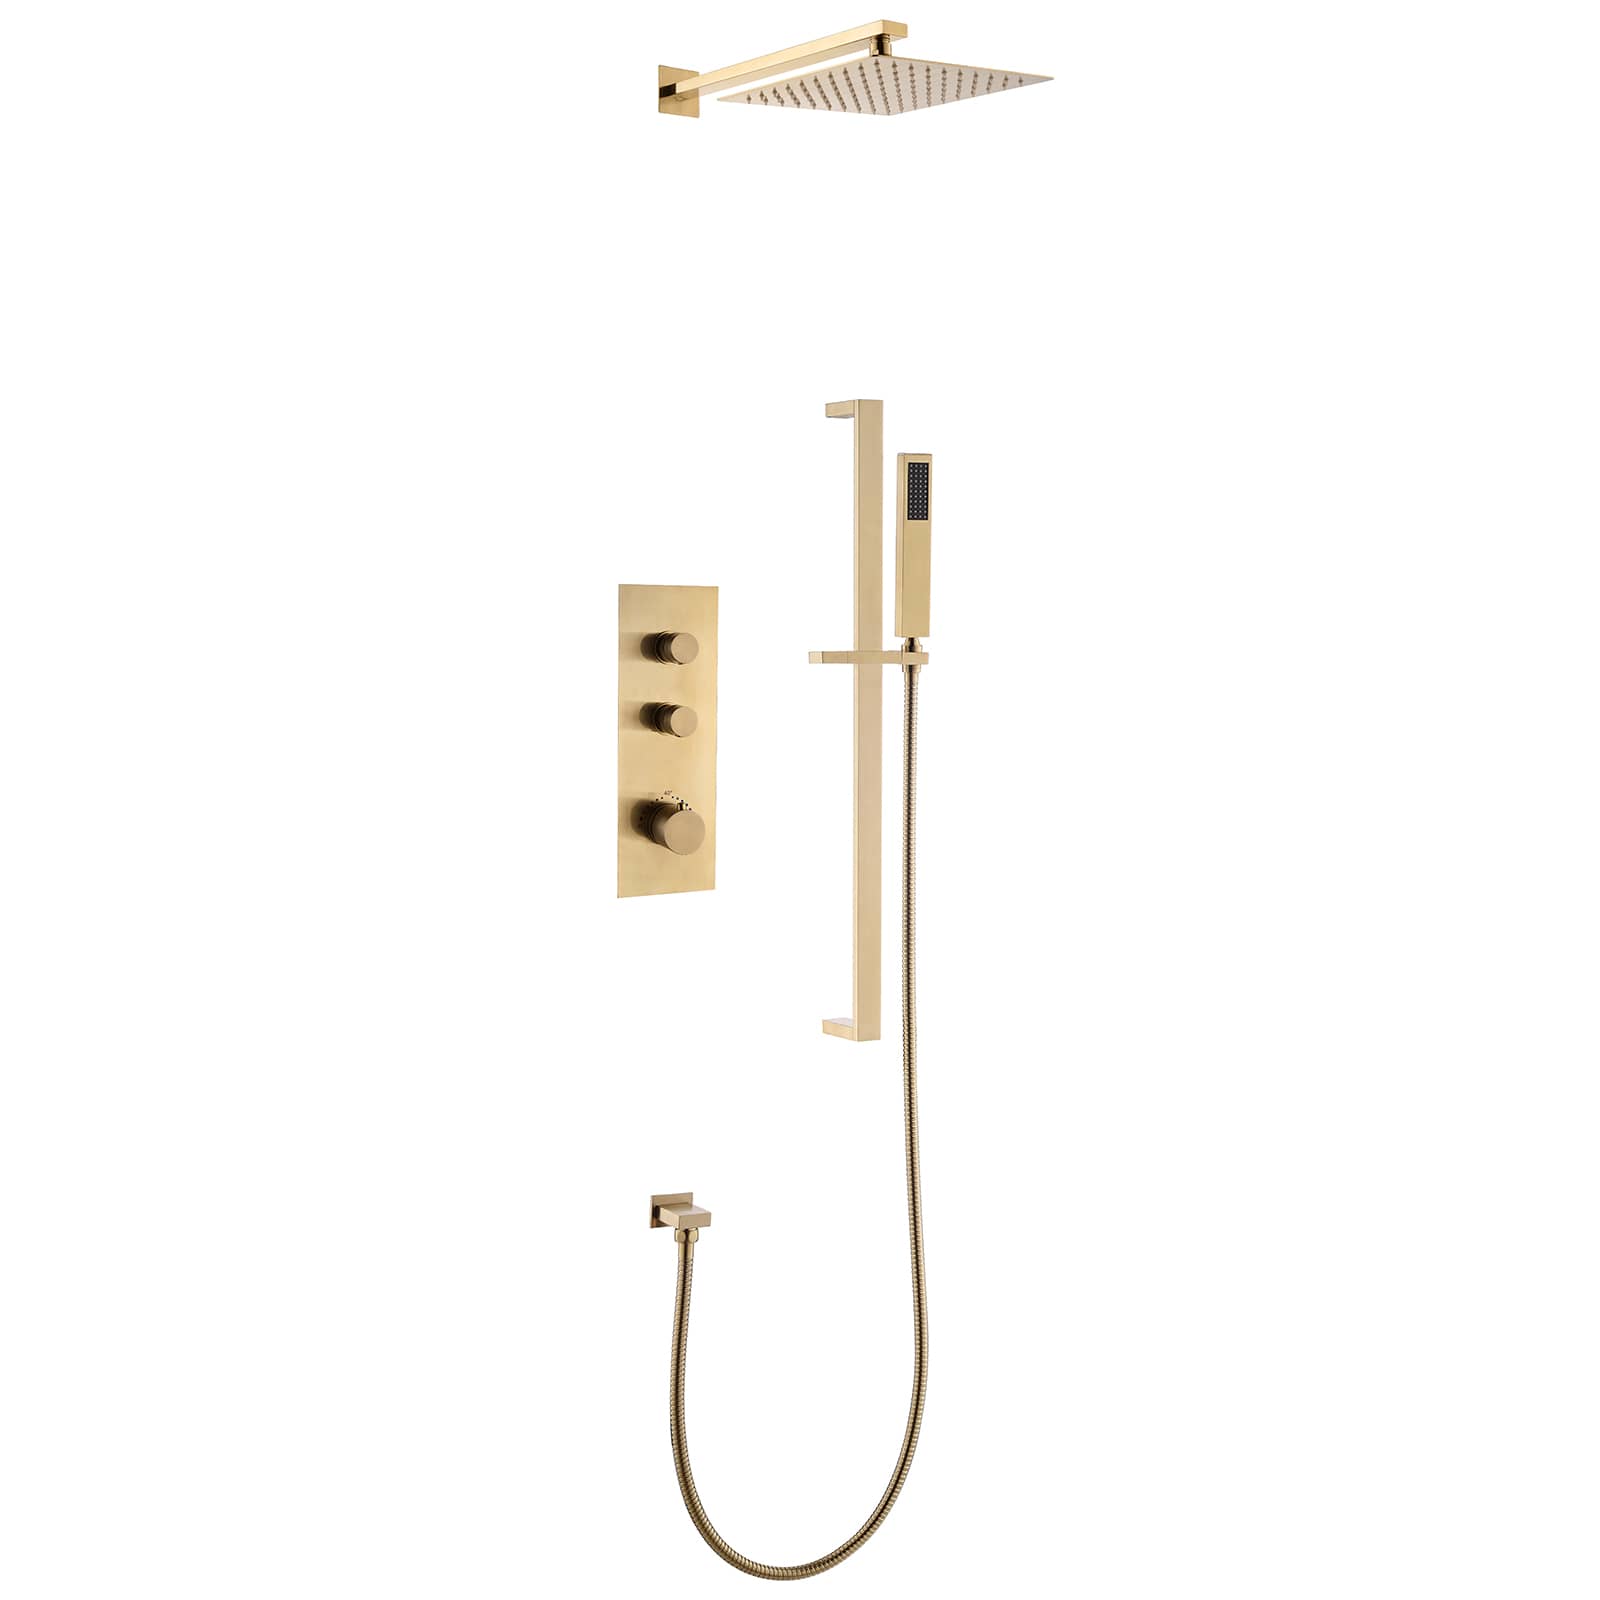 CASAINC Brushed Gold 7.6-l/min 1-Handle Wall Mount Shower Faucet with Valve Included-Casainc Canada